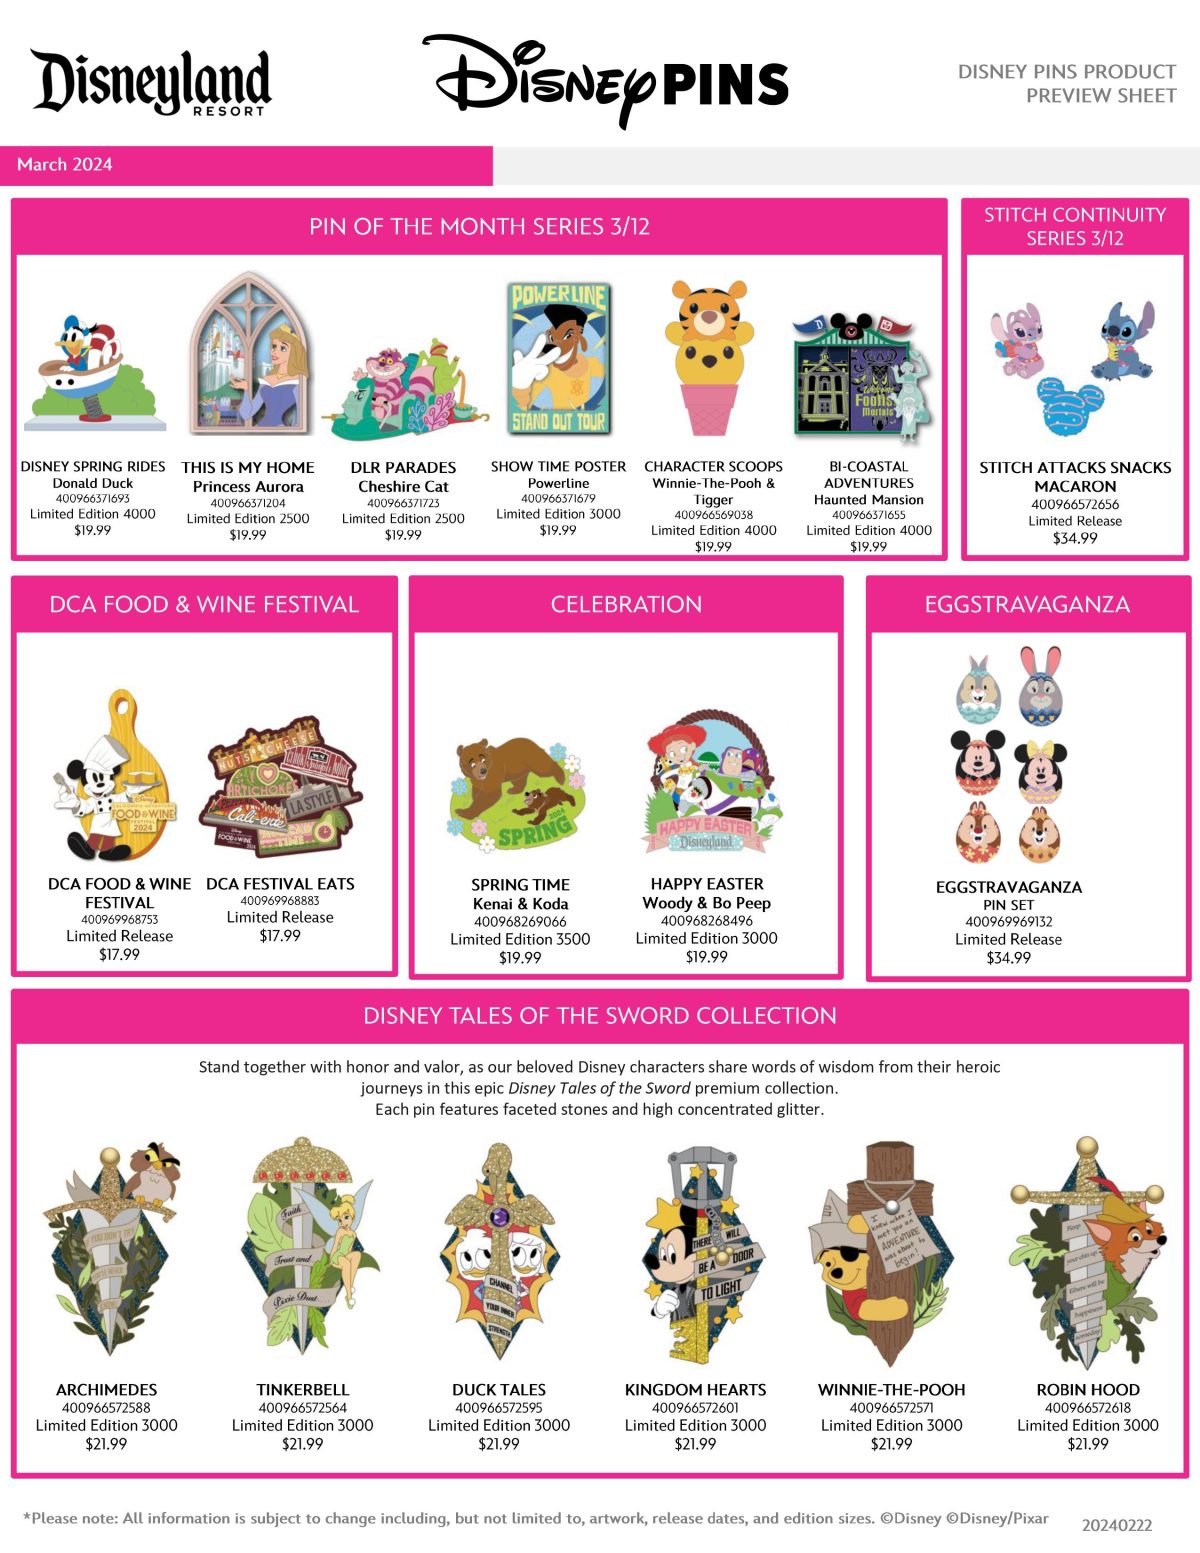 March 2024 Disneyland Pin Preview